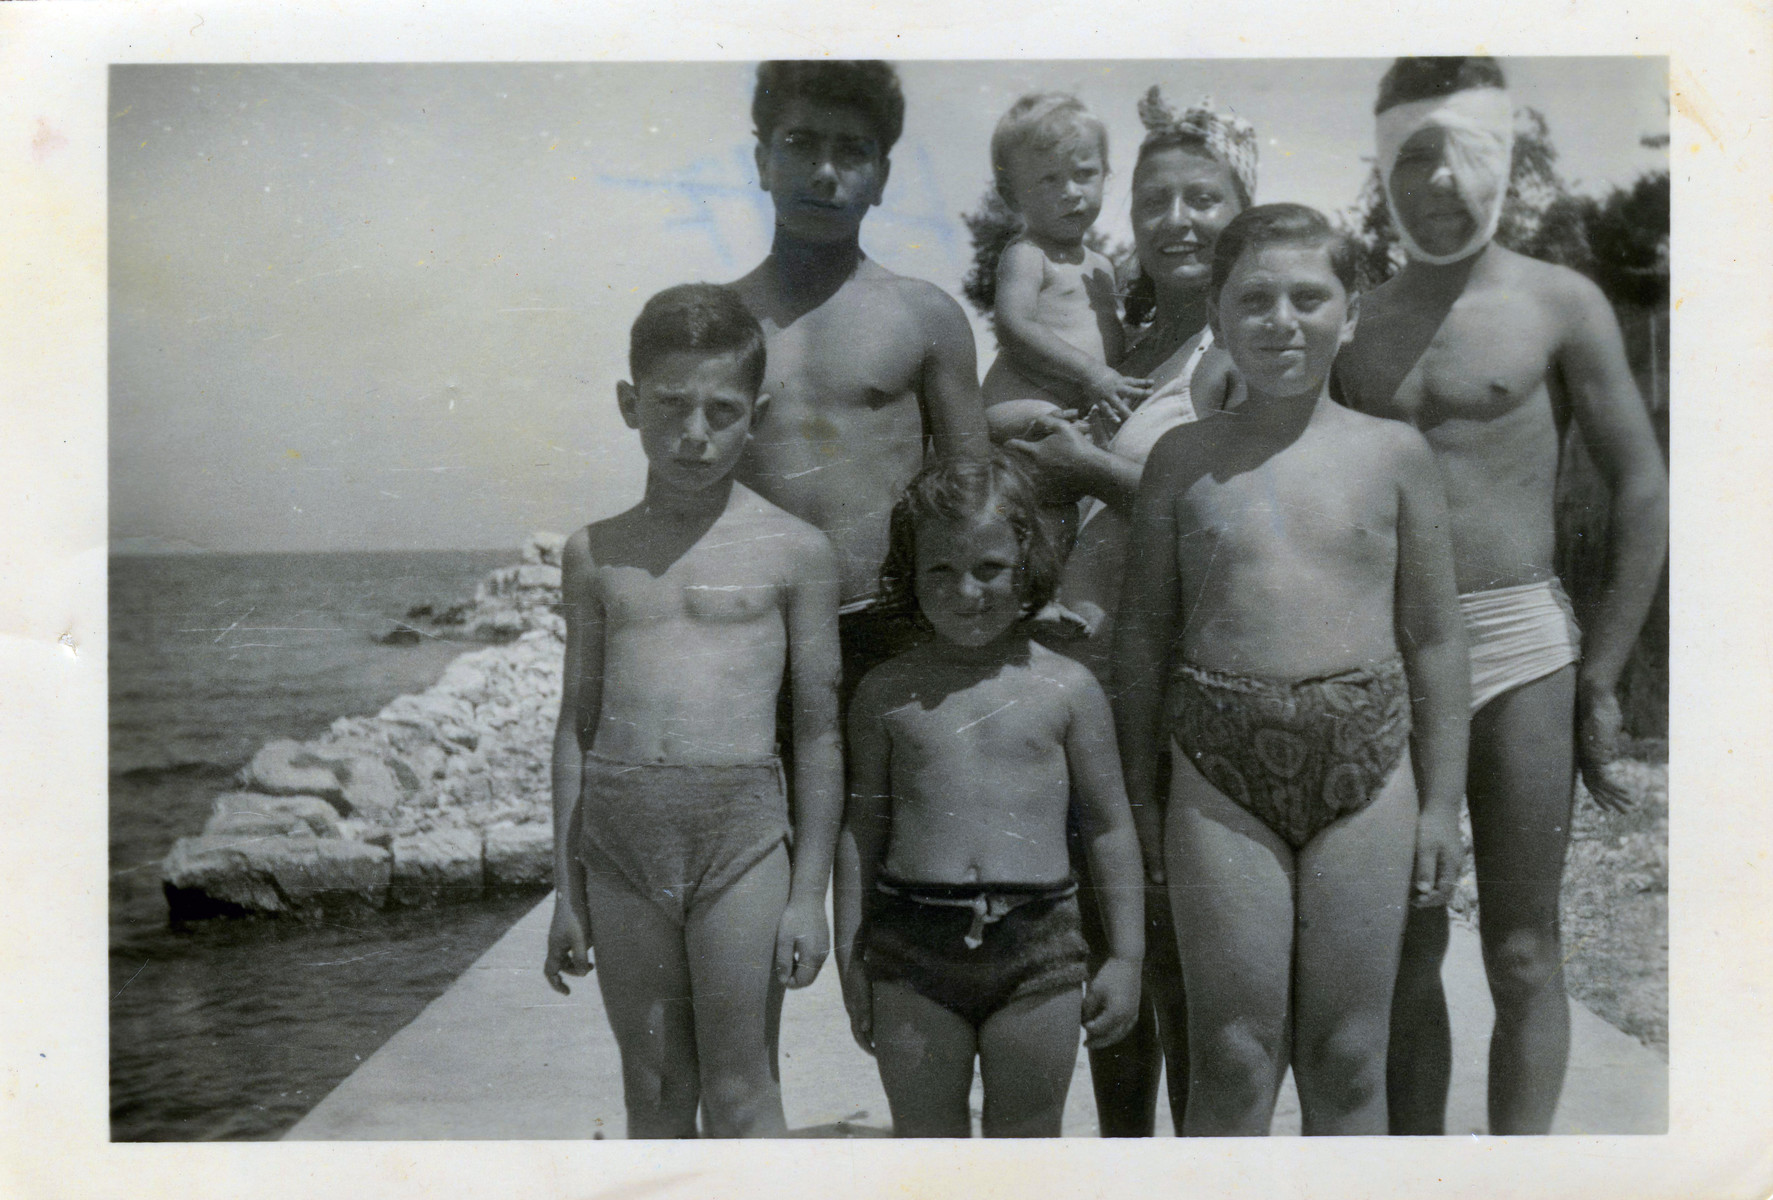 A group of survivors pose on the beach after the war.

Joseph Manojlvic is the tall child on the left.  The child on the left is a non-Jewish survivor who was wounded in the eye.